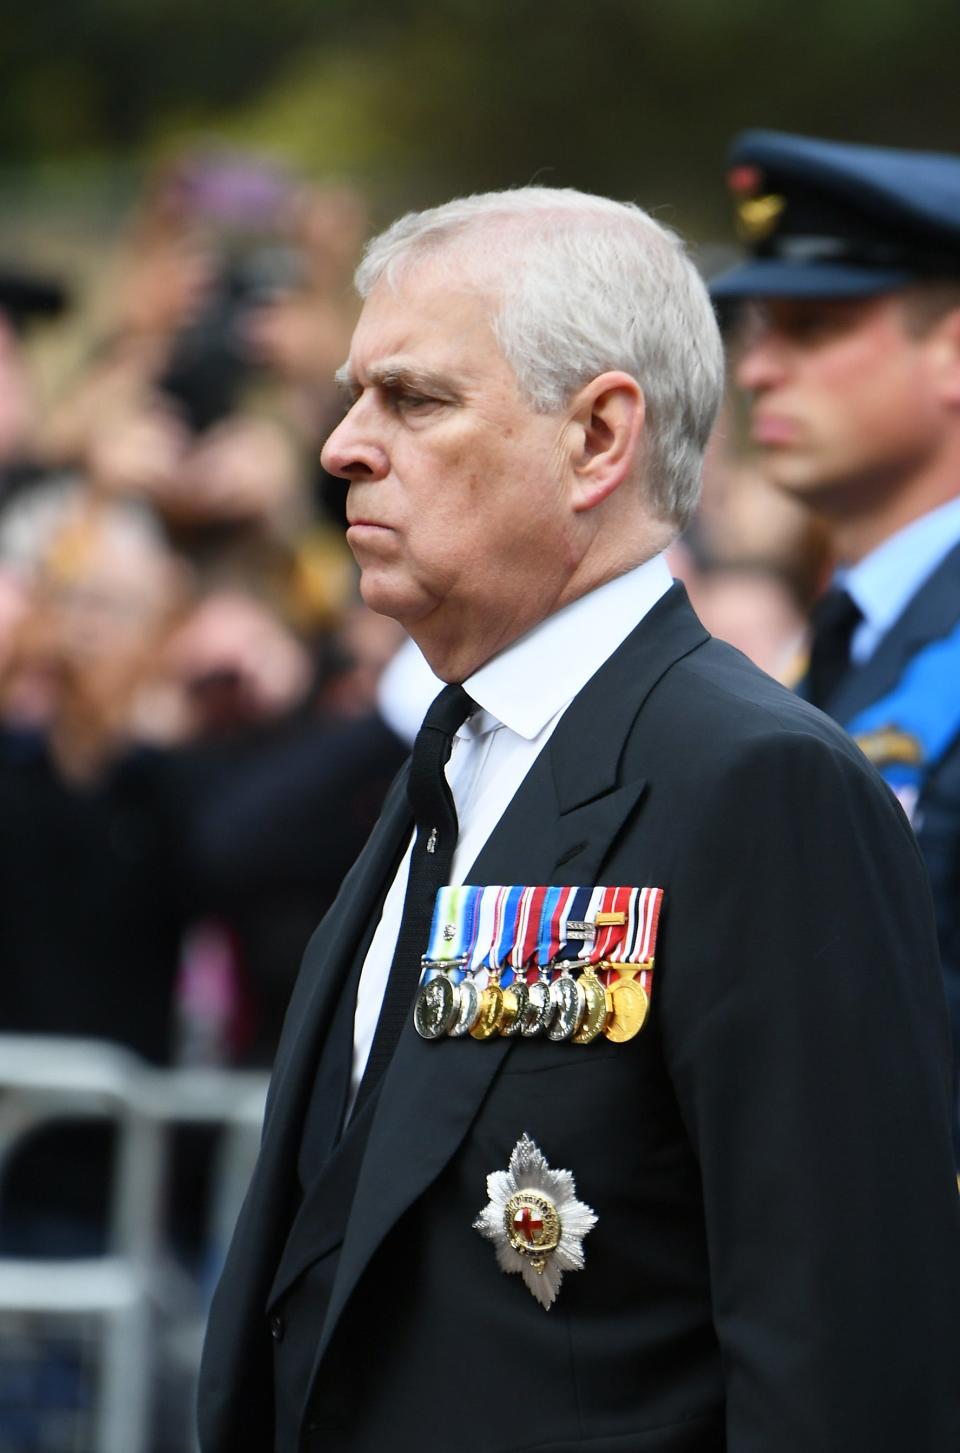 Prince Andrew, Duke of York, follows behind the queen's funeral cortege borne on the State Gun Carriage of the Royal Navy on Sept. 19, 2022.